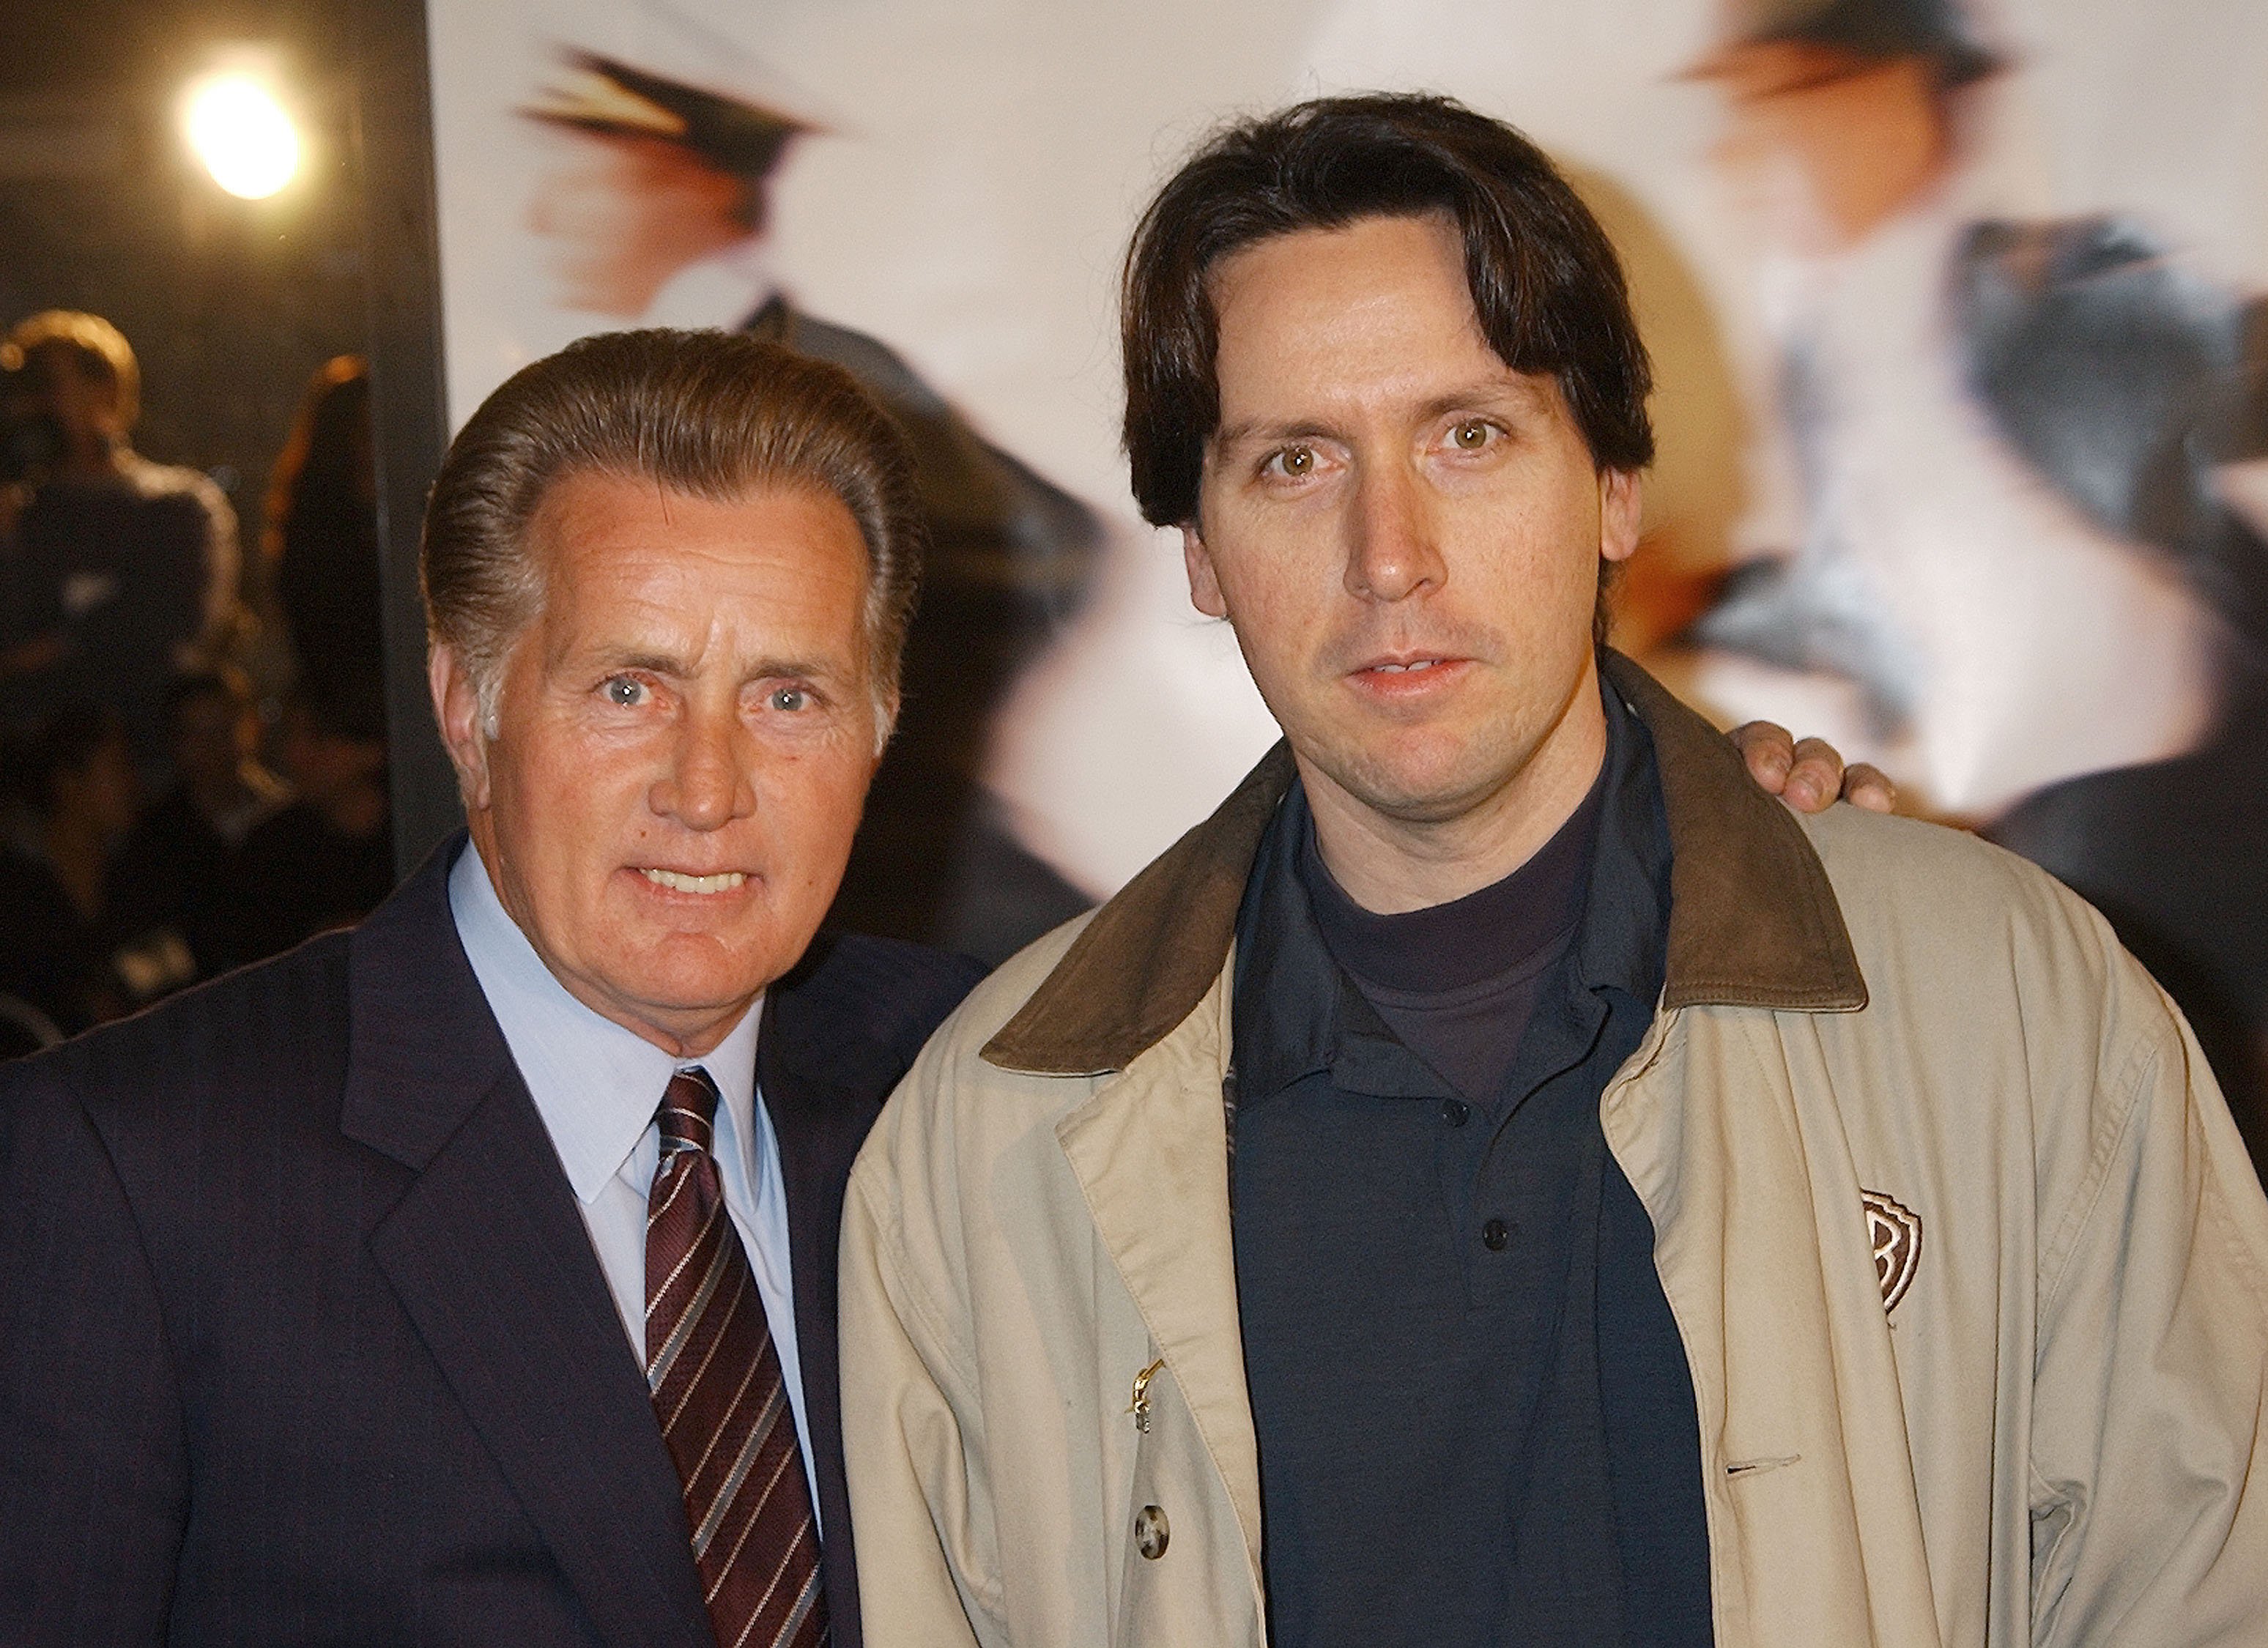 Martin Sheen and his son Ramon Estevez during "Catch Me If You Can" Los Angeles Premiere at the Mann Village Theater in Westwood, CA.  |  Source: Getty Images